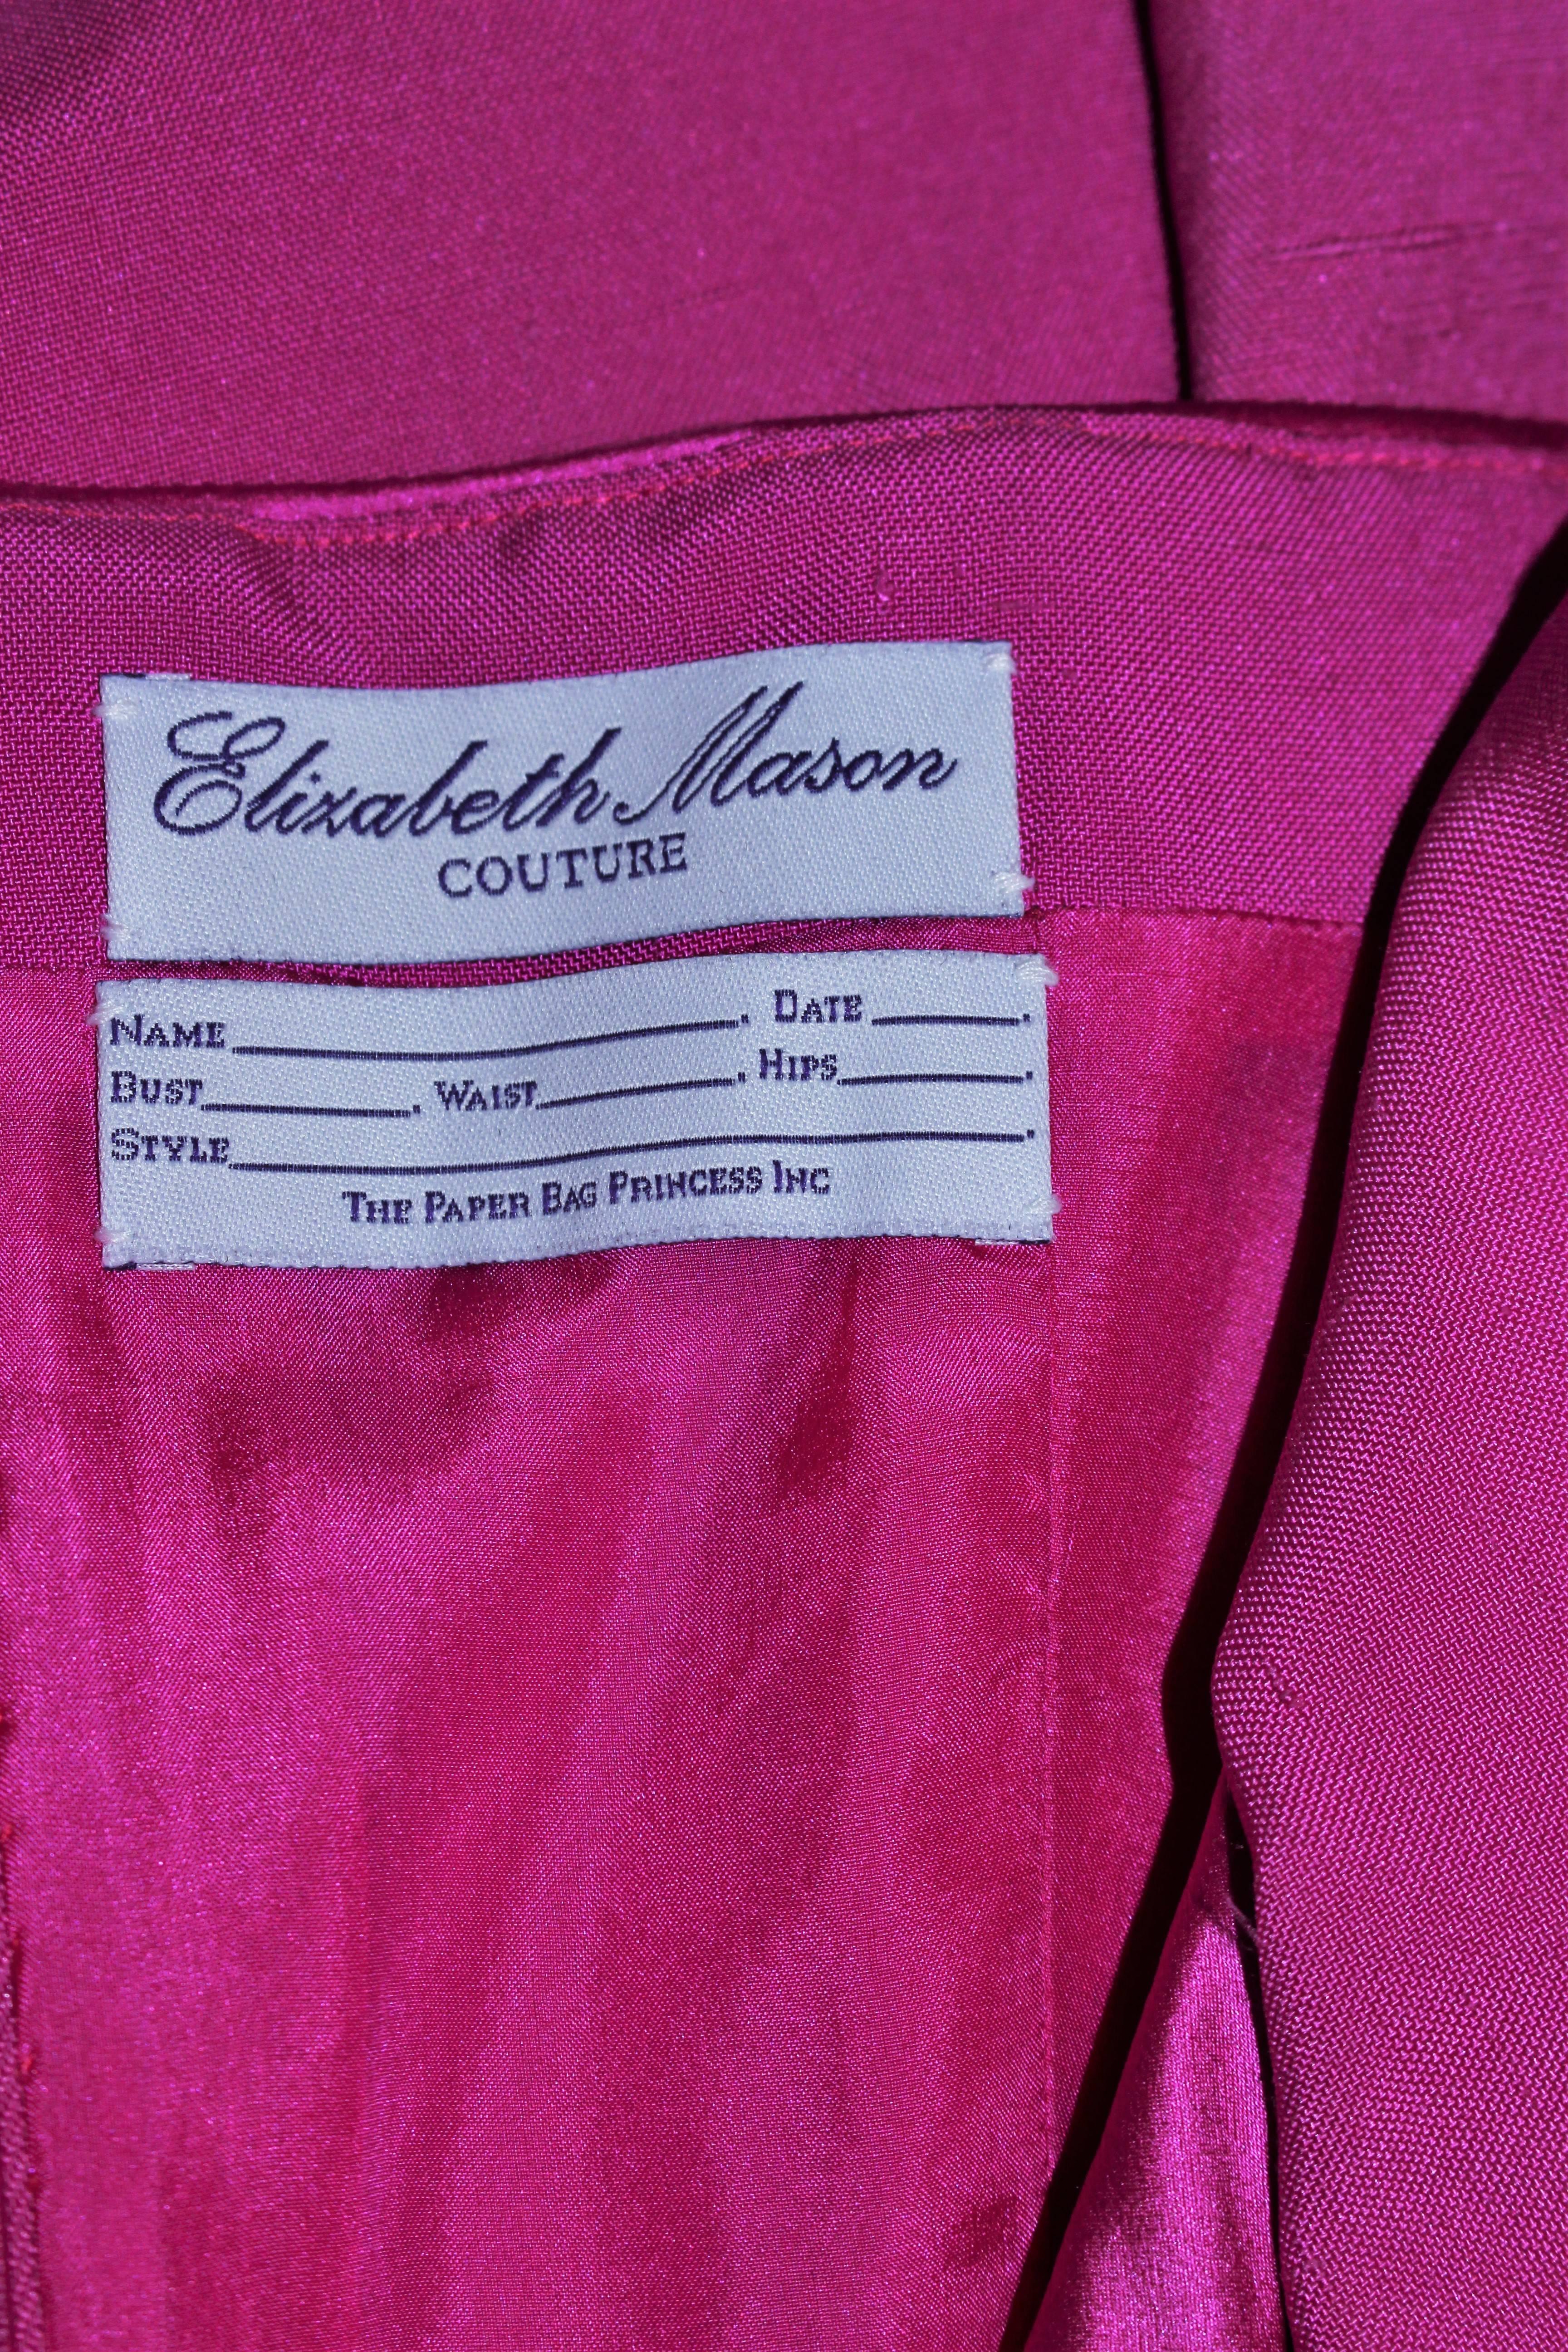 ELIZABETH MASON COUTURE Magenta Silk Cocktail Dress Made to Order For Sale 3